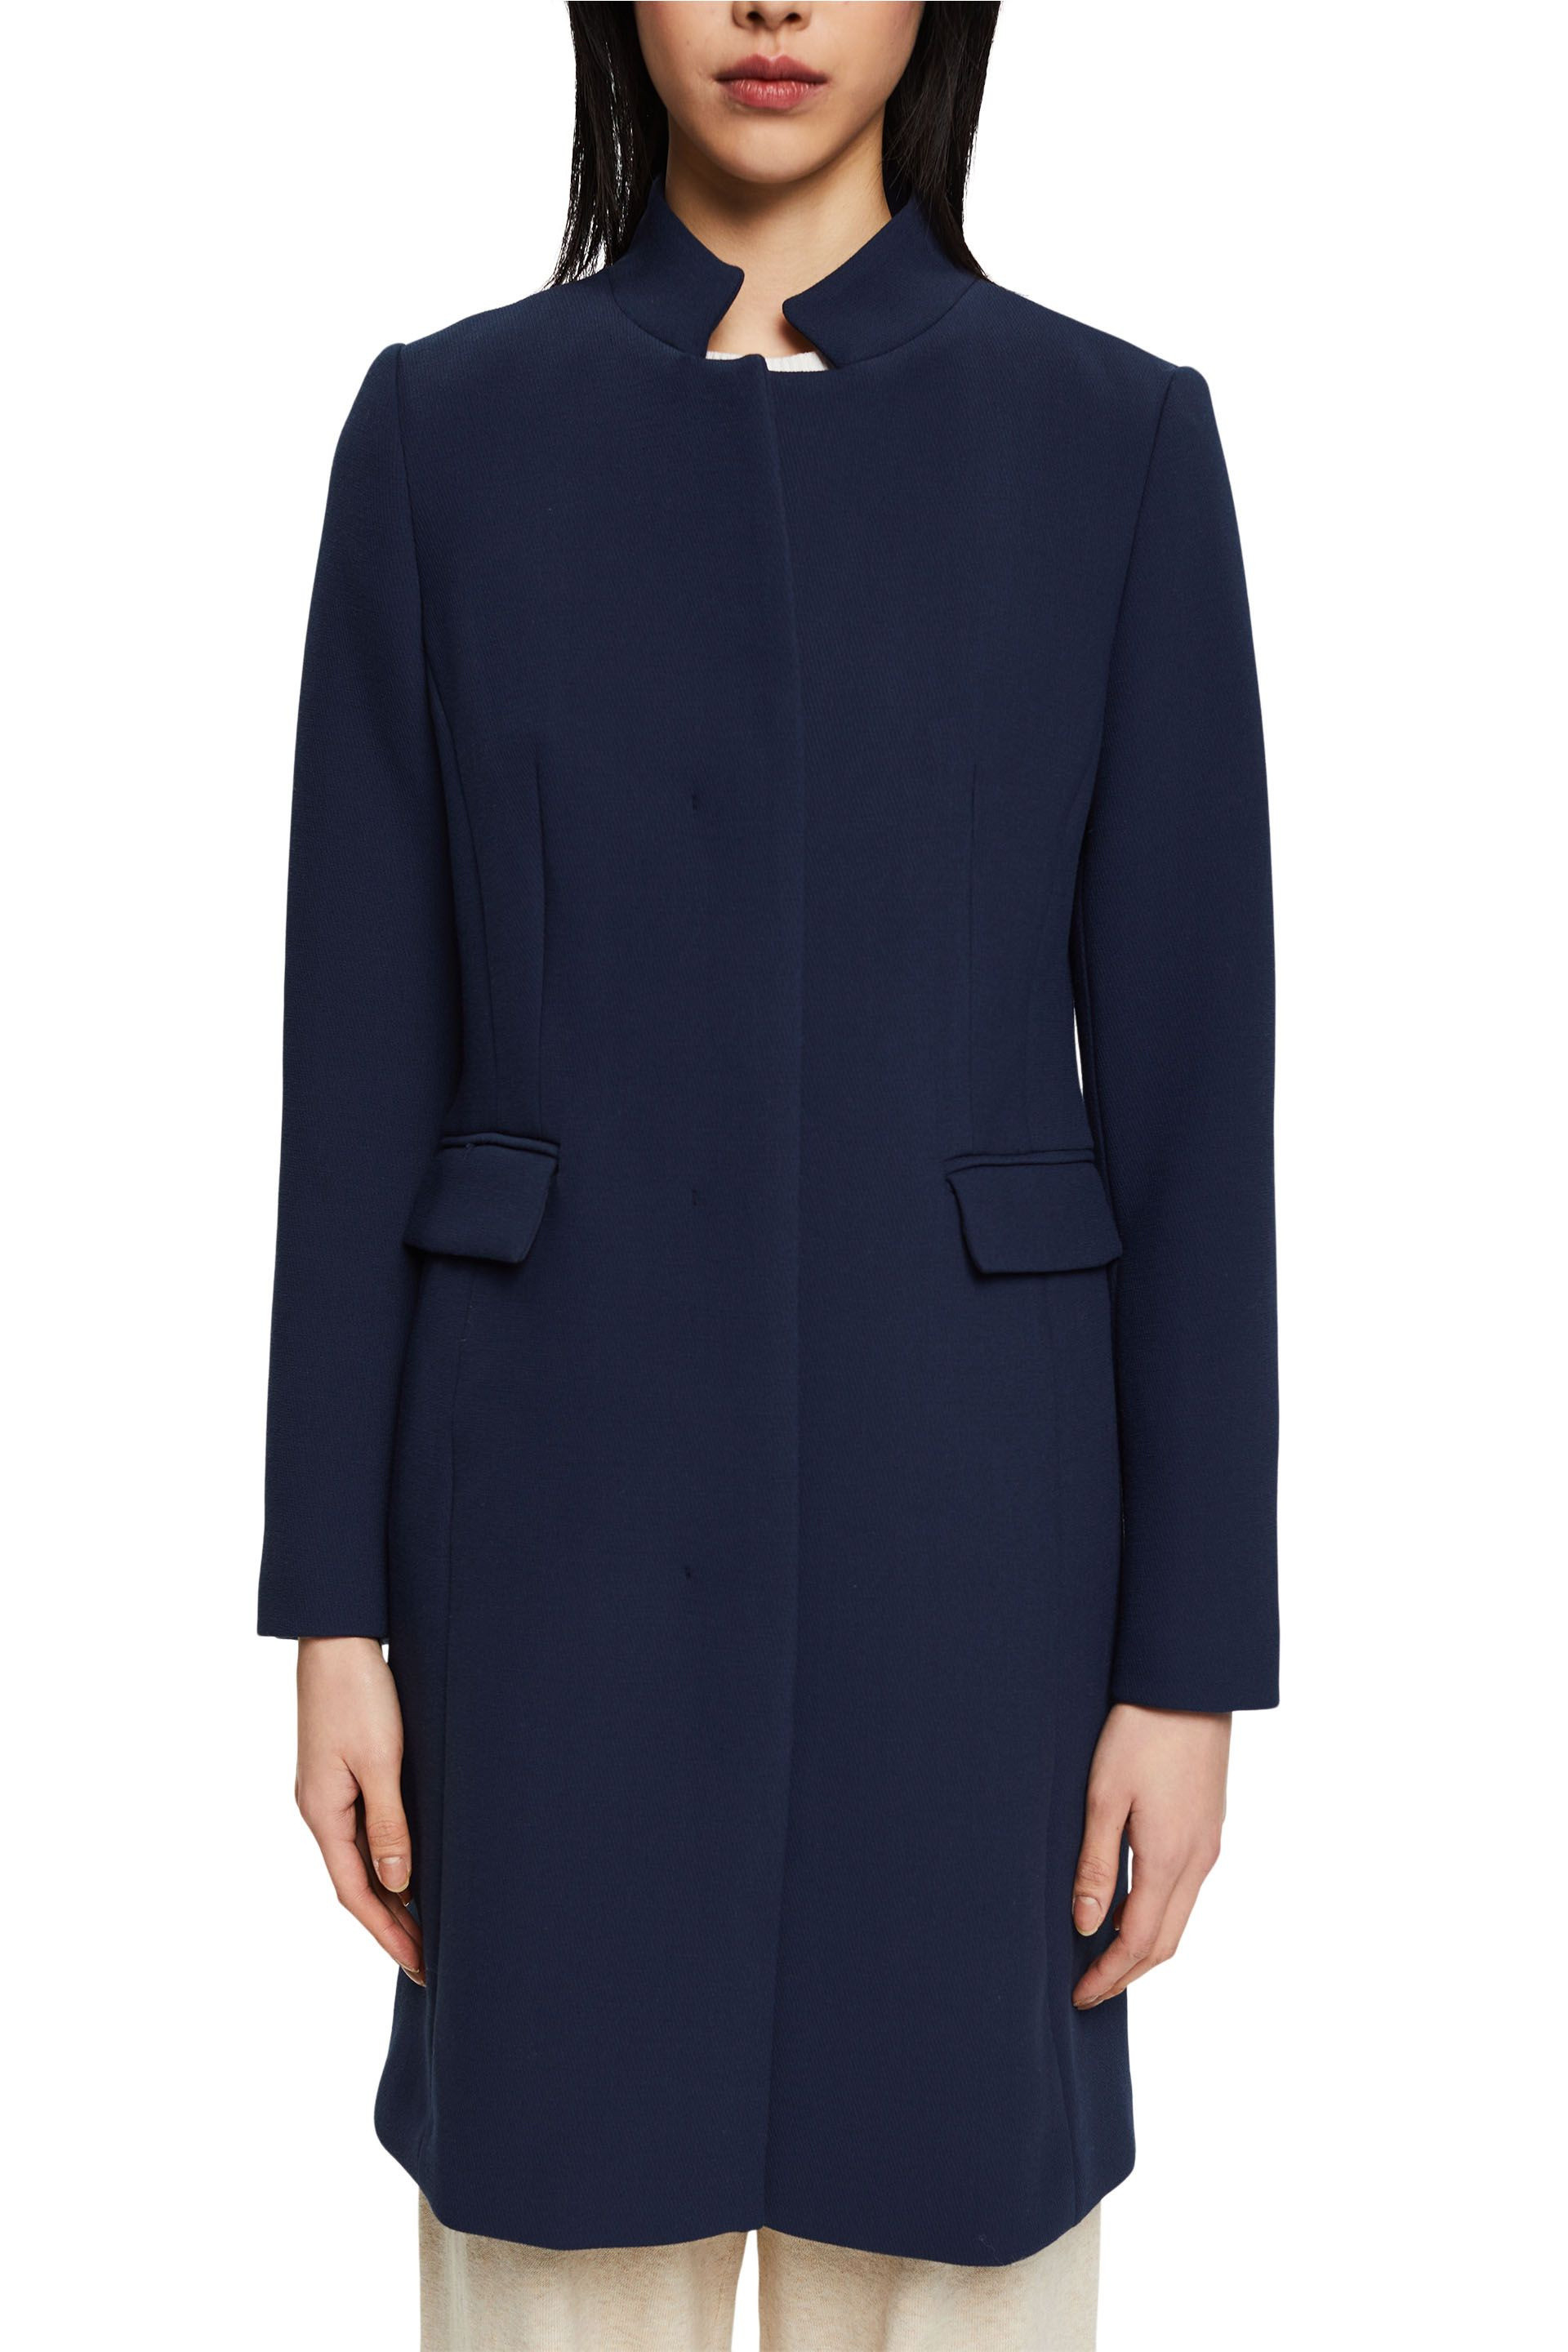 Fitted coat, Blue, large image number 1